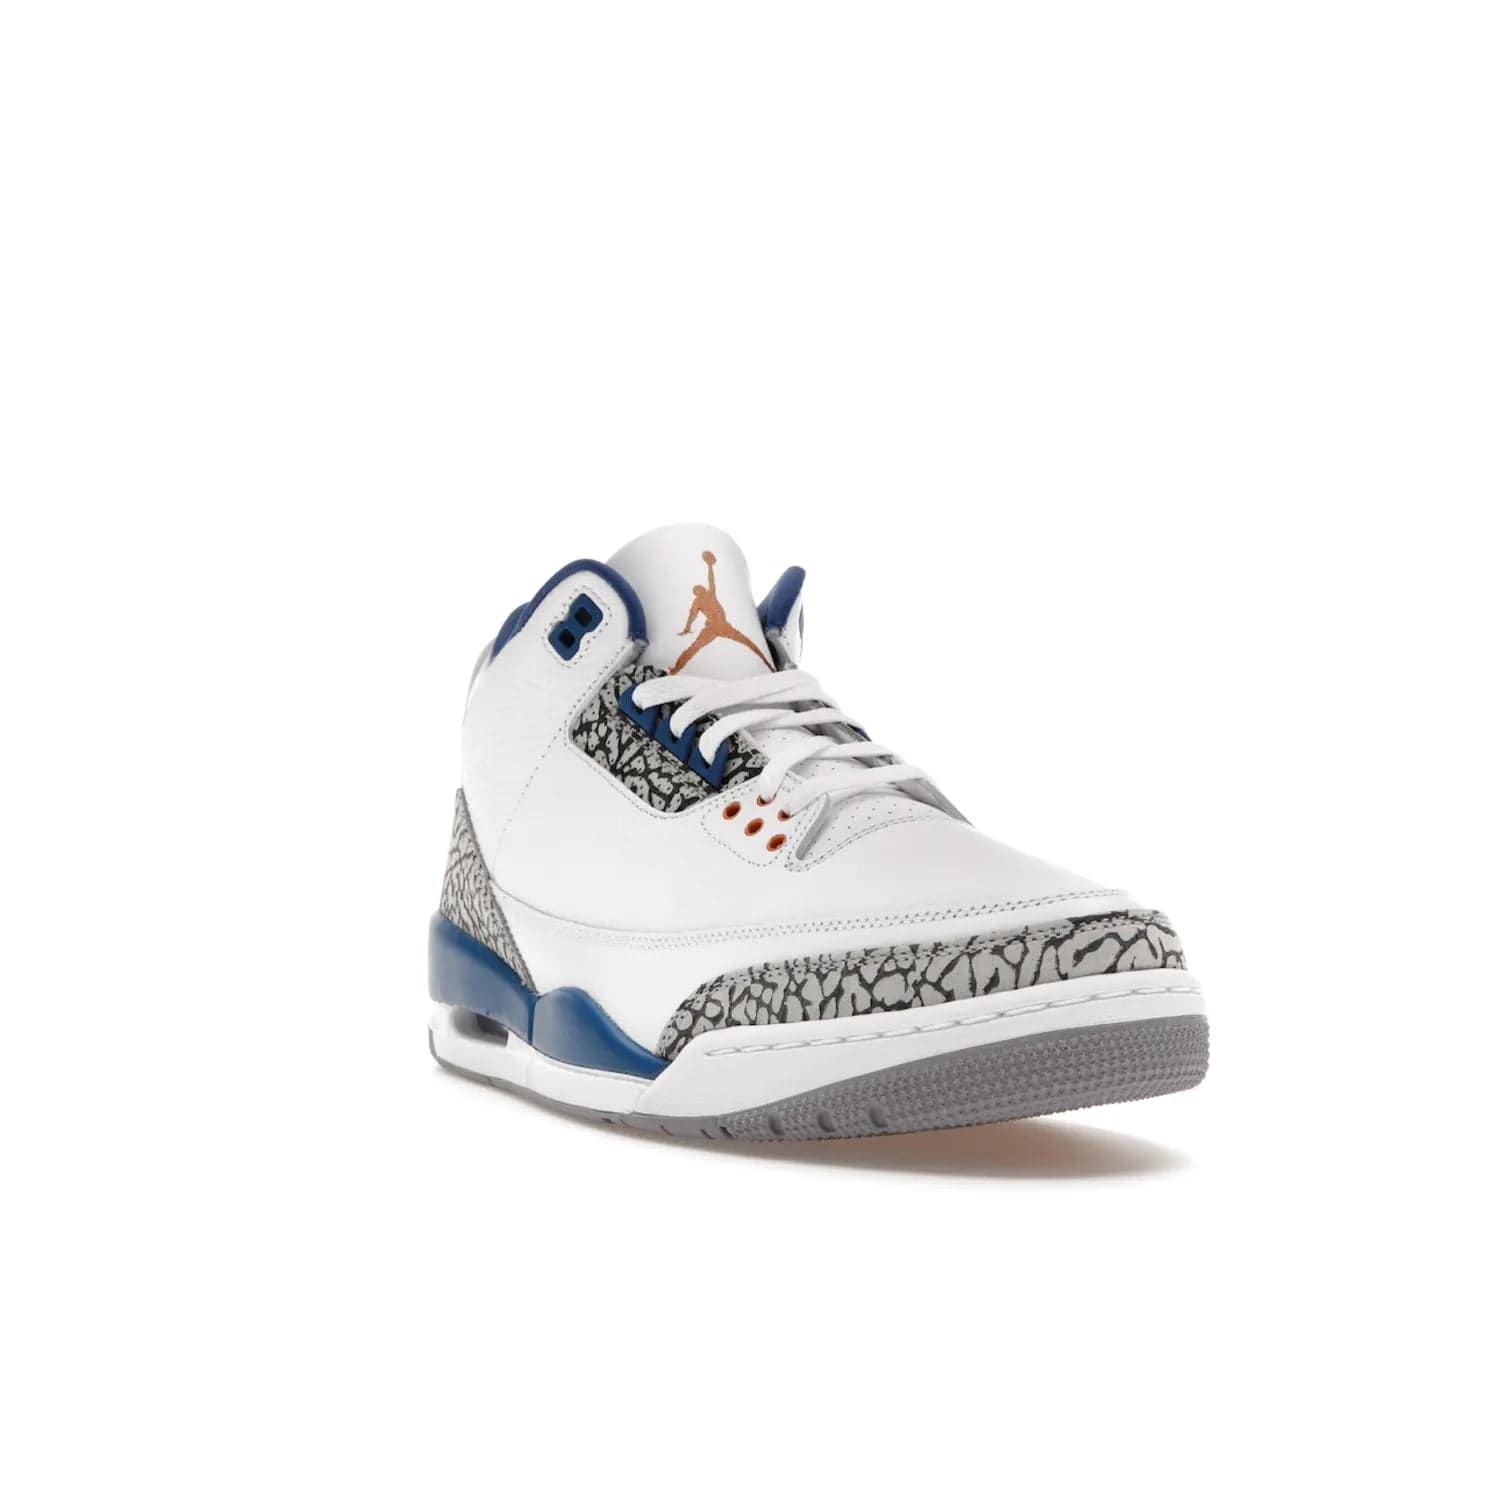 Jordan 3 Retro Wizards - Image 7 - Only at www.BallersClubKickz.com - ##
Special tribute sneaker from Jordan Brand to Michael Jordan's time with the Washington Wizards. Iconic white upper, orange Jumpman logo, blue accents, metallic copper details, and cement grey outsole. Buy the Air Jordan 3 Retro Wizards April 29, 2023.